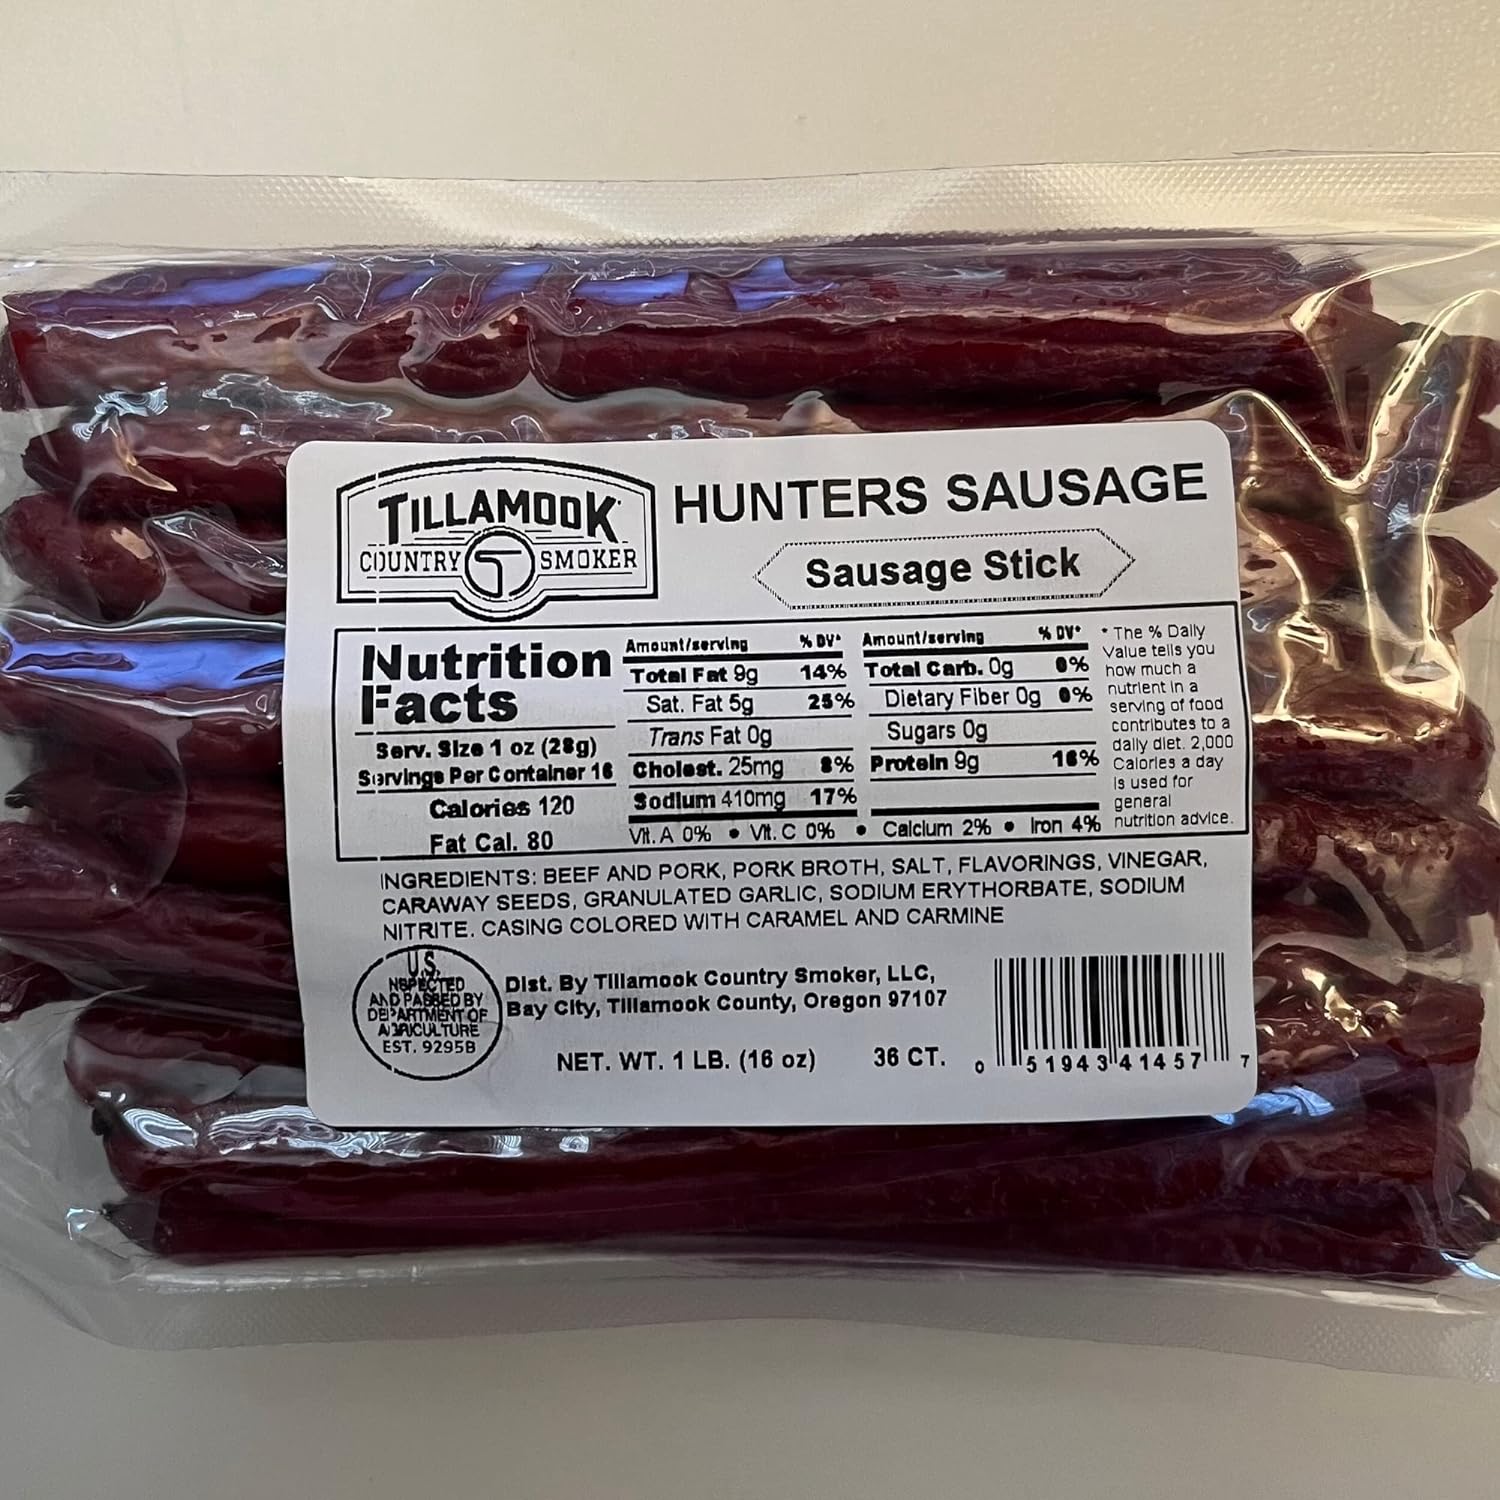 Tillamook Country Smoker Real Hardwood Smoked Sausages, Hunter's Sausage Meat Sticks, Low Carb, High Protein, Ready to Eat Snacks, 36 Count Bulk Pack